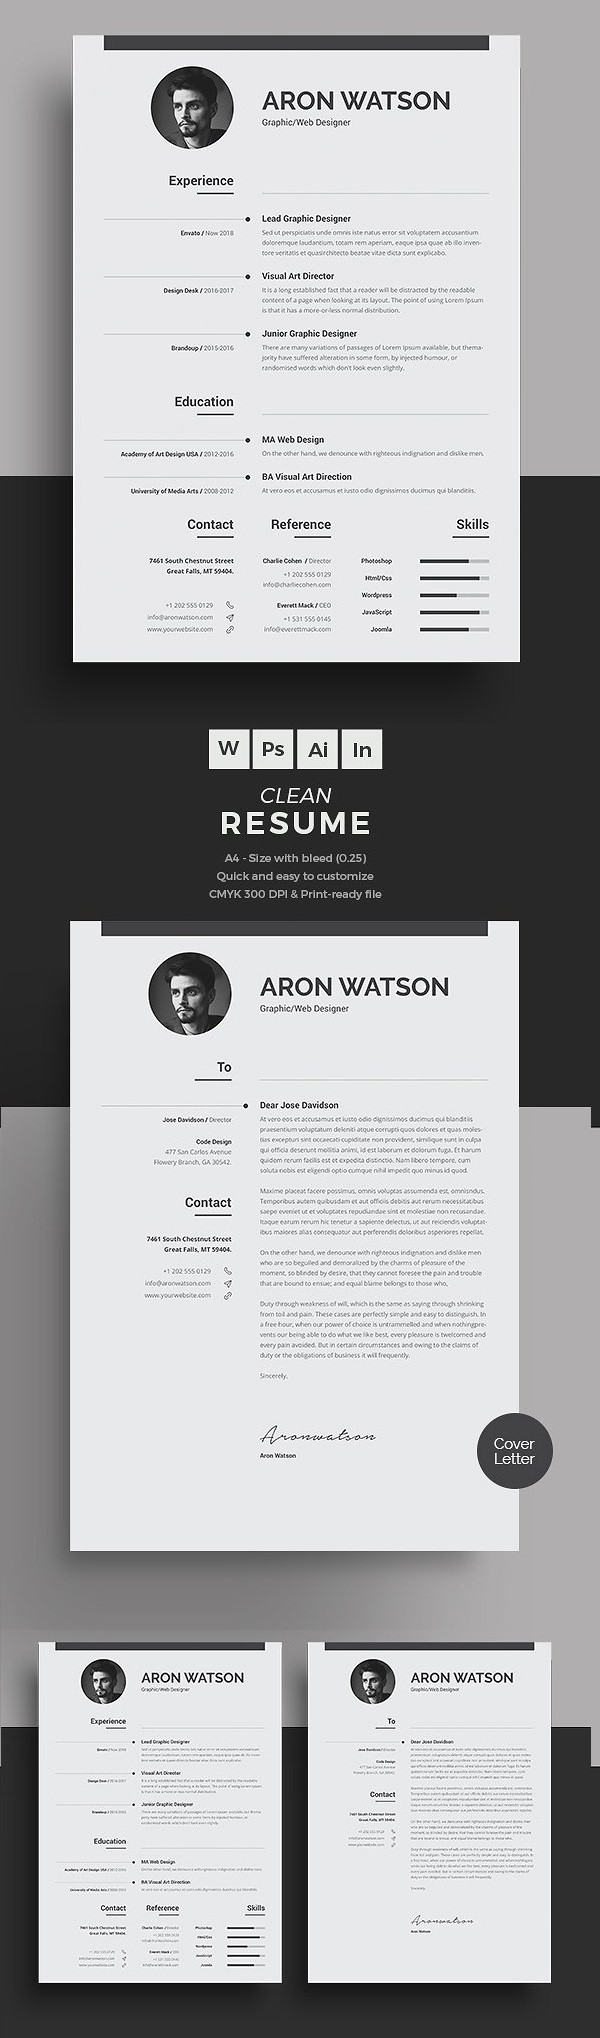 50 Best Resume Templates For 2018 - 20